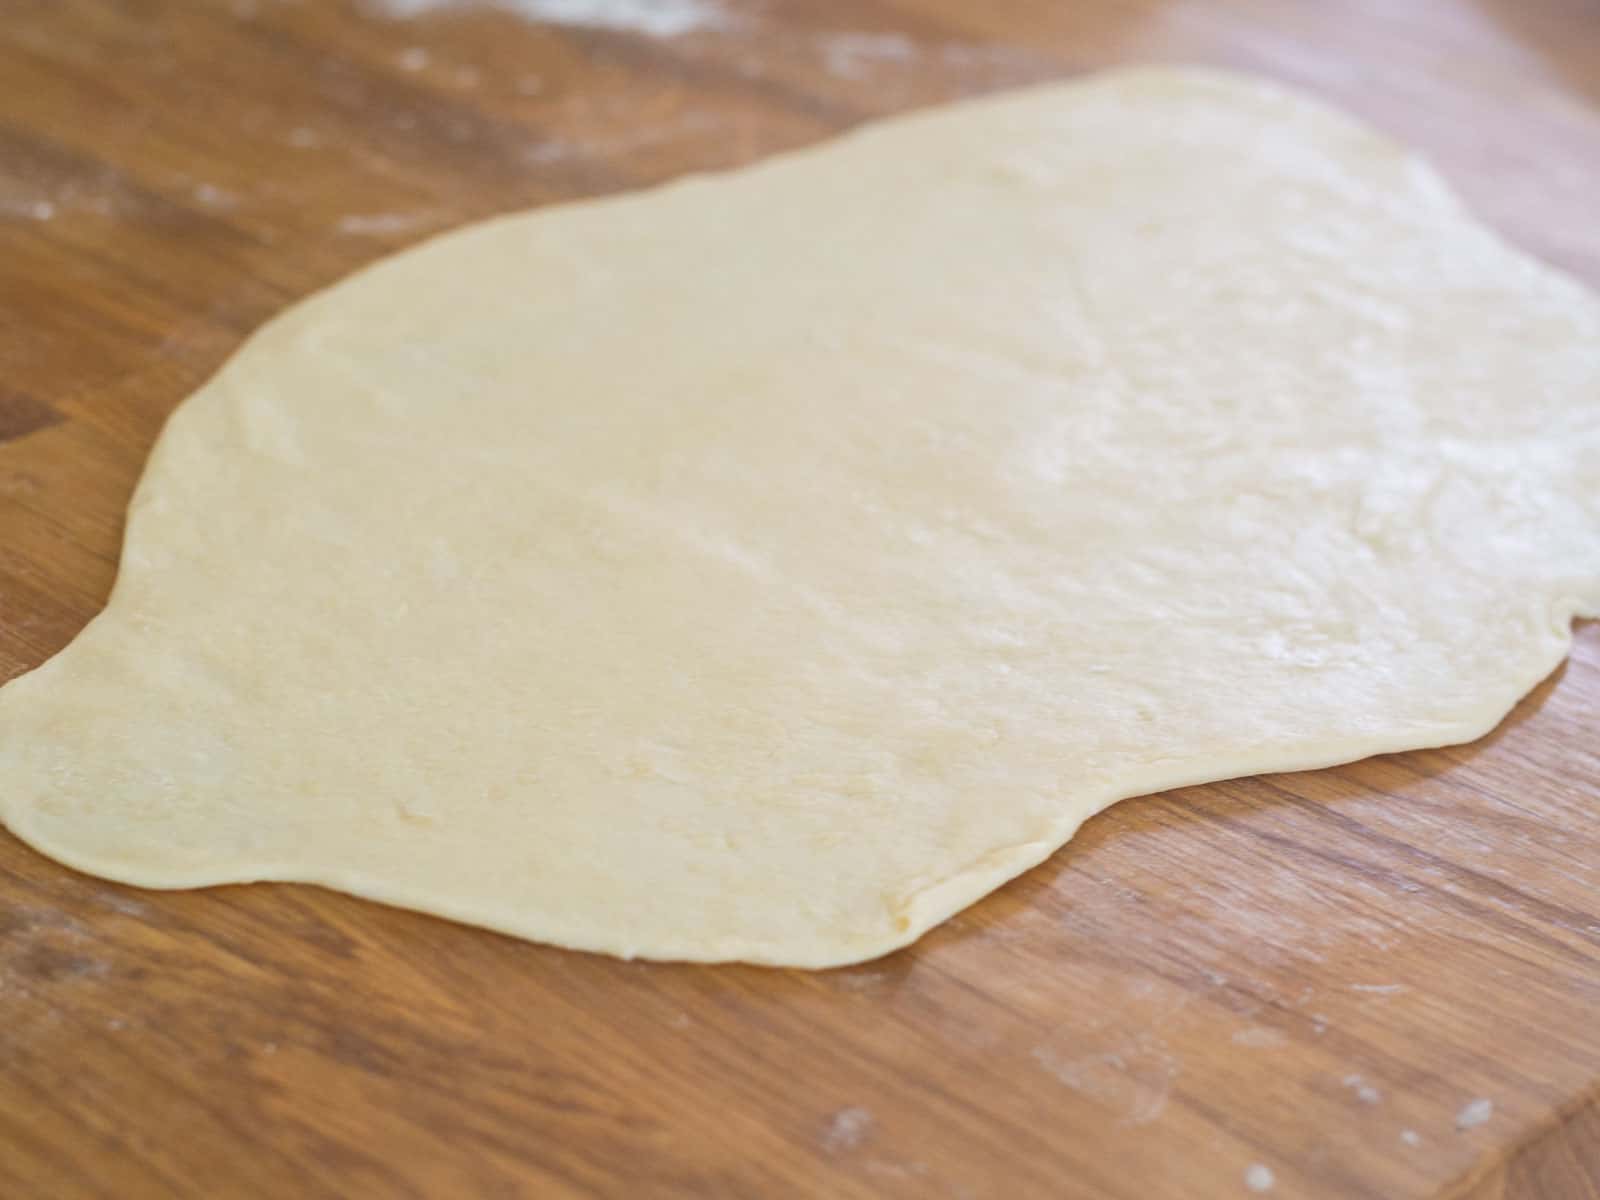 Roll the empanada dough to a ¼ inch in thickness.